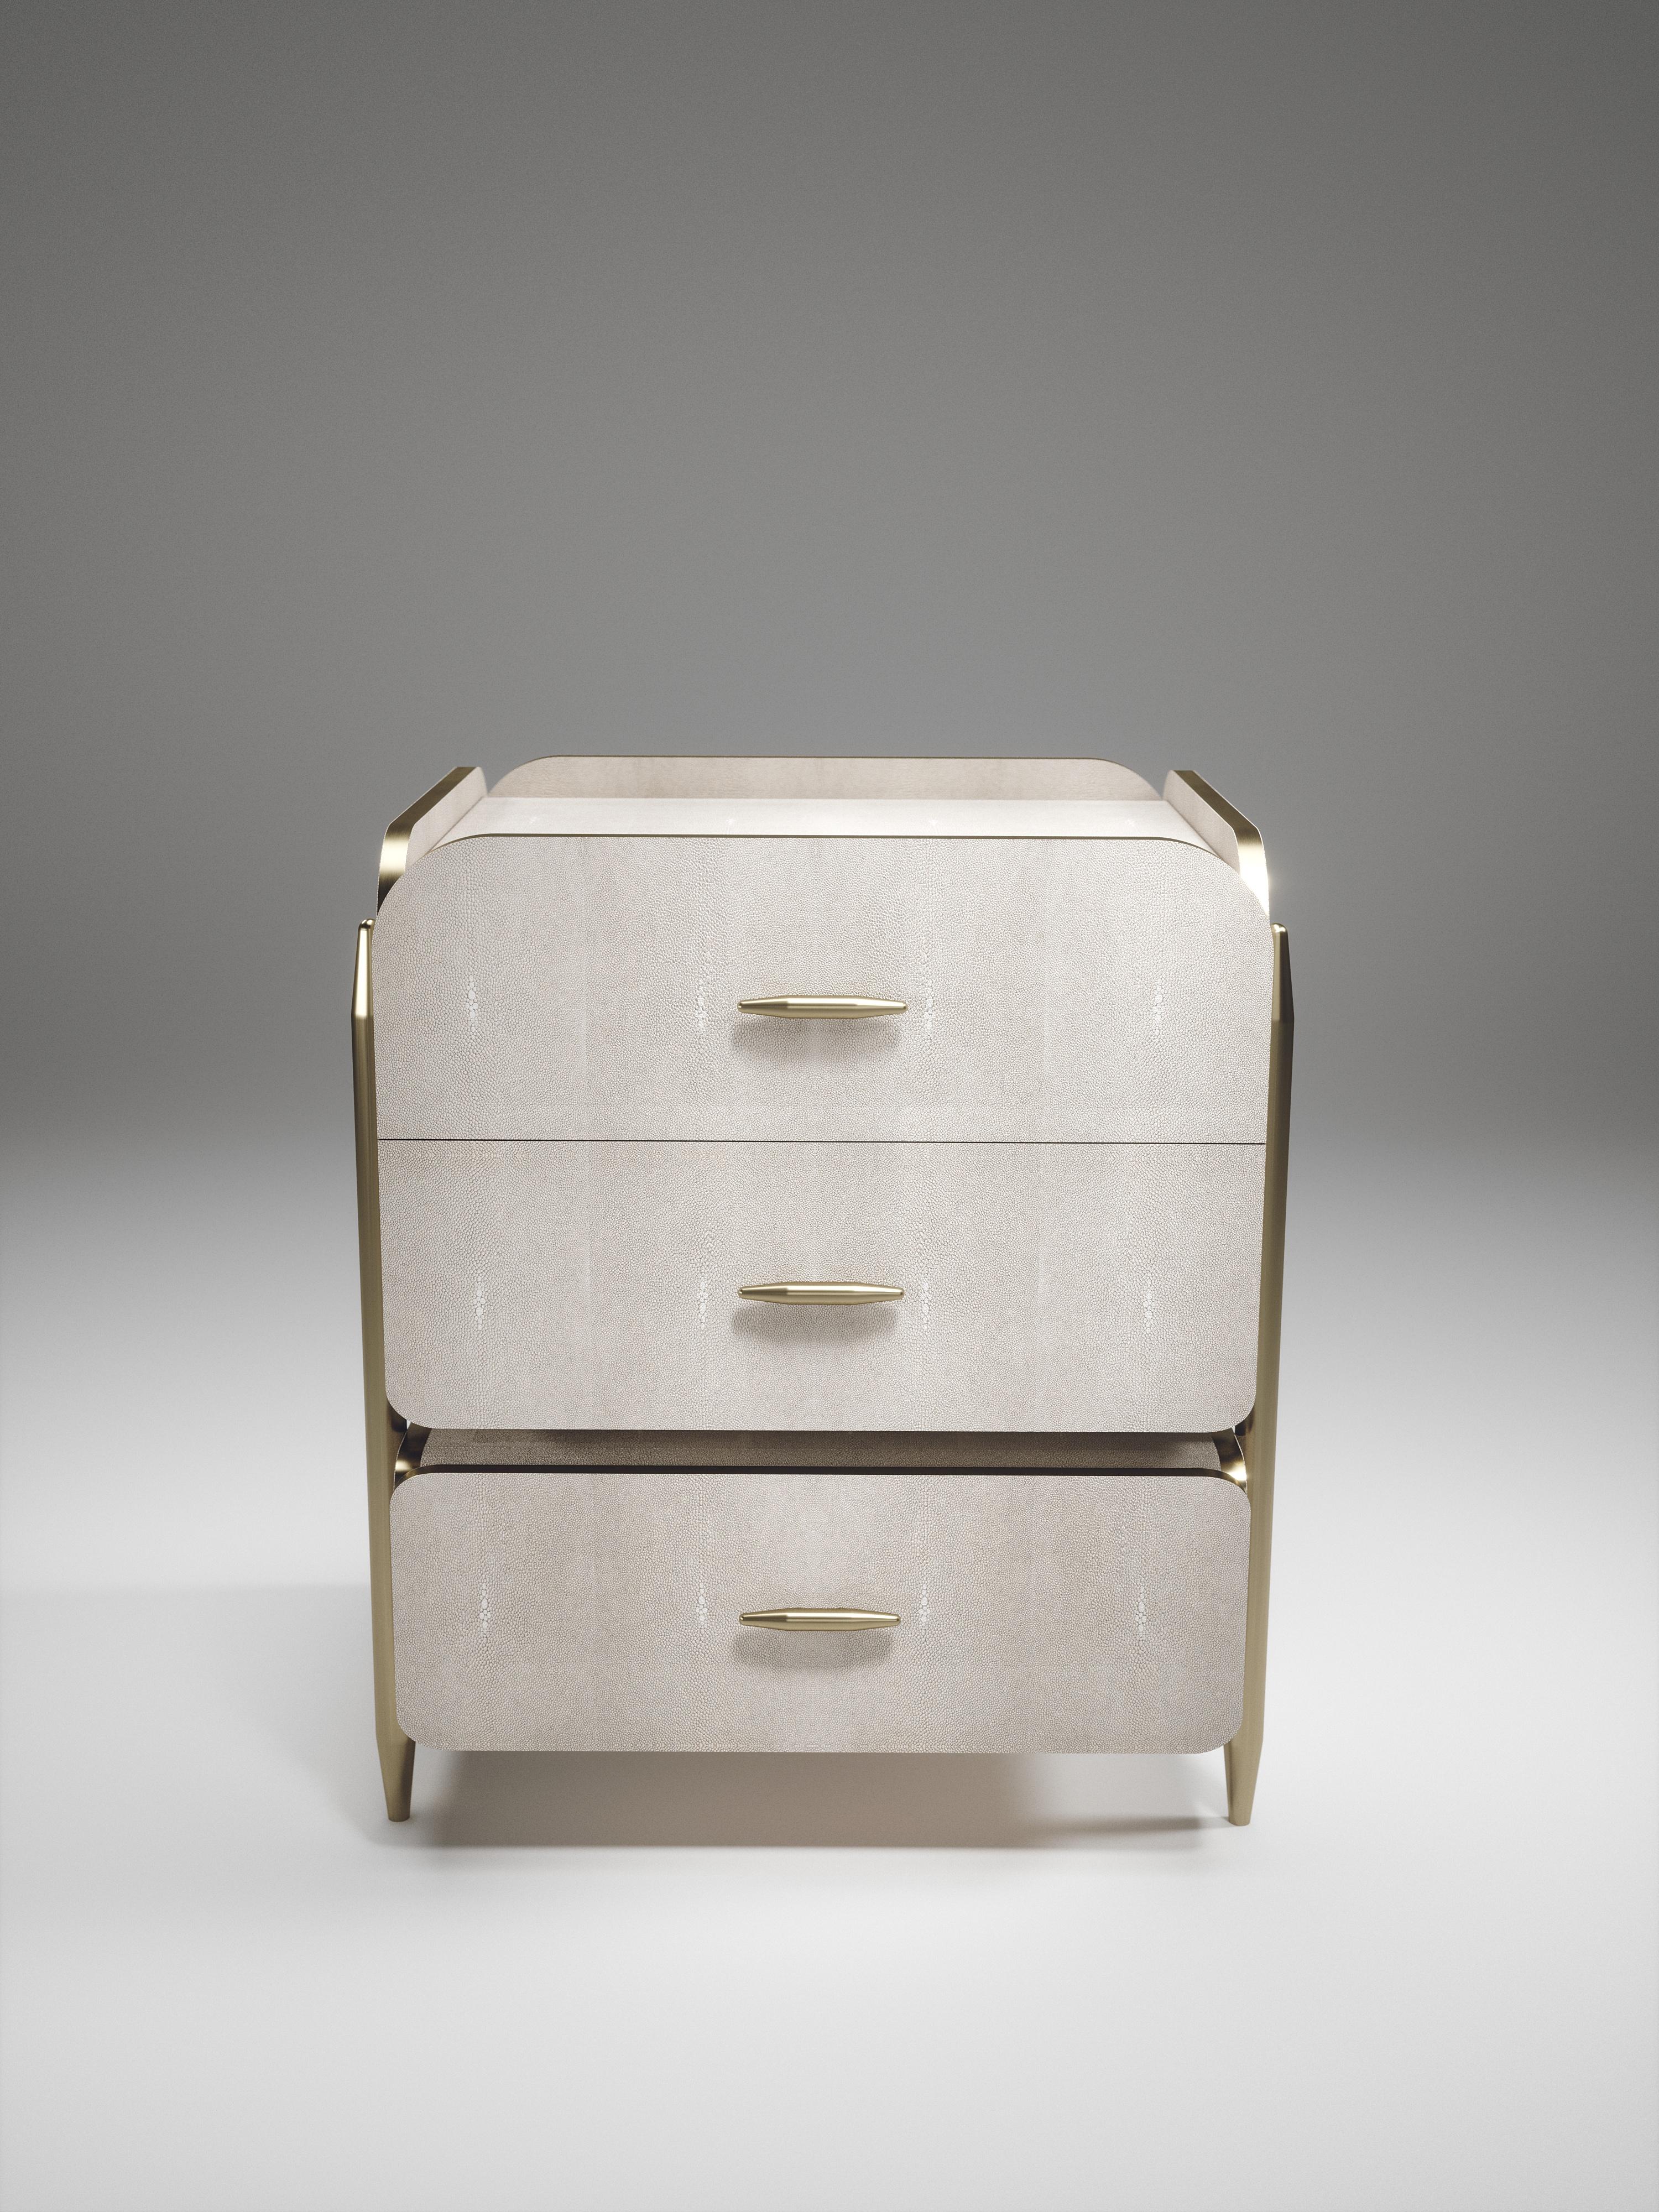 The Dandy square bedside table by Kifu Paris is an elegant and luxurious home accent, inlaid in cream shagreen with bronze-patina brass details. This piece includes 3 drawers total and the interiors are inlaid in gemelina wood veneer. This piece is